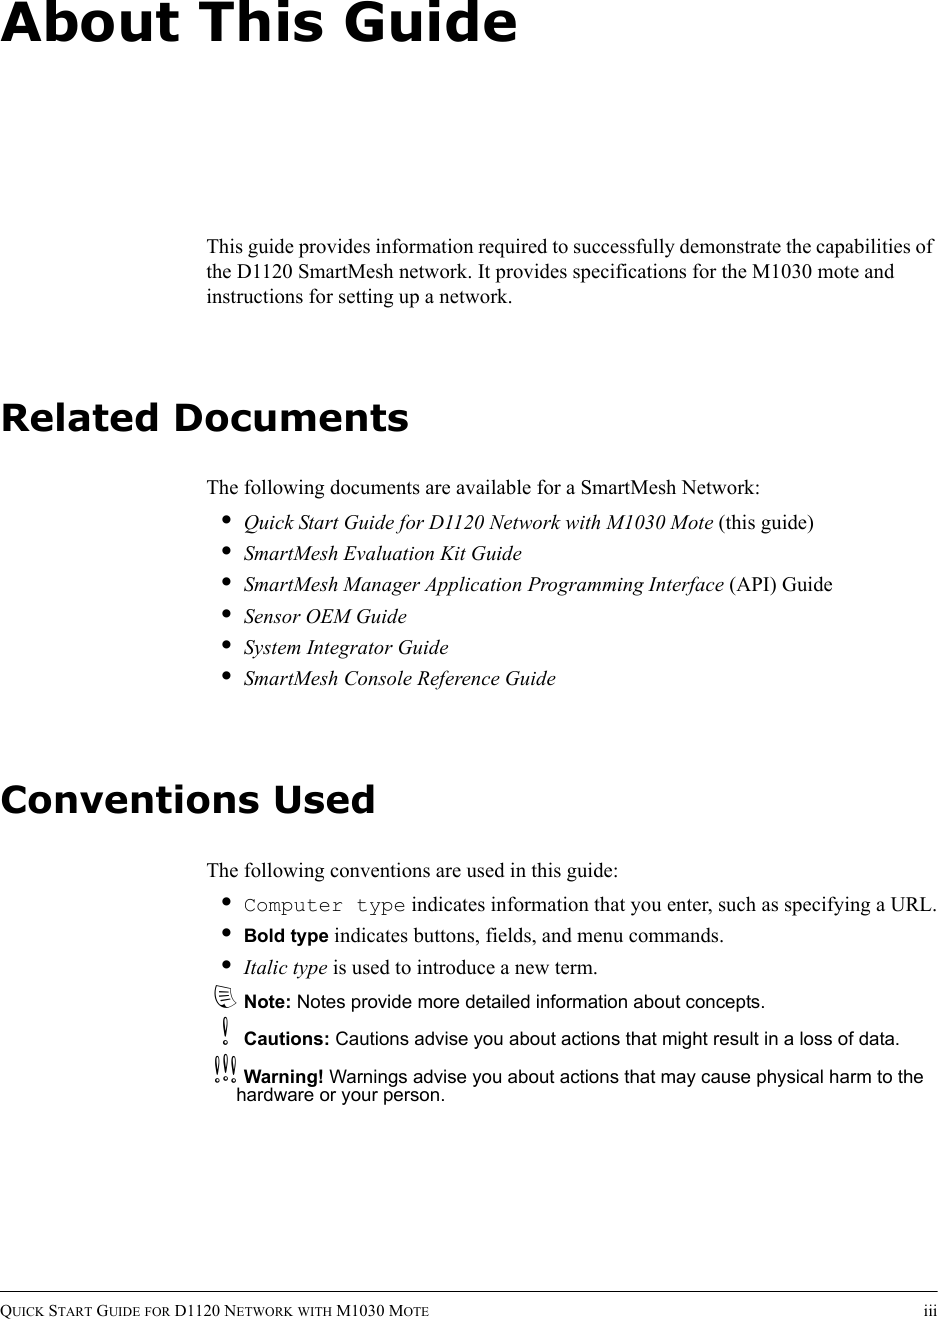 QUICK START GUIDE FOR D1120 NETWORK WITH M1030 MOTE iiiAbout This GuideThis guide provides information required to successfully demonstrate the capabilities of the D1120 SmartMesh network. It provides specifications for the M1030 mote and instructions for setting up a network.Related DocumentsThe following documents are available for a SmartMesh Network:•Quick Start Guide for D1120 Network with M1030 Mote (this guide)•SmartMesh Evaluation Kit Guide•SmartMesh Manager Application Programming Interface (API) Guide•Sensor OEM Guide•System Integrator Guide•SmartMesh Console Reference GuideConventions UsedThe following conventions are used in this guide:•Computer type indicates information that you enter, such as specifying a URL.•Bold type indicates buttons, fields, and menu commands.•Italic type is used to introduce a new term.dNote: Notes provide more detailed information about concepts.bCautions: Cautions advise you about actions that might result in a loss of data.cWarning! Warnings advise you about actions that may cause physical harm to the hardware or your person.